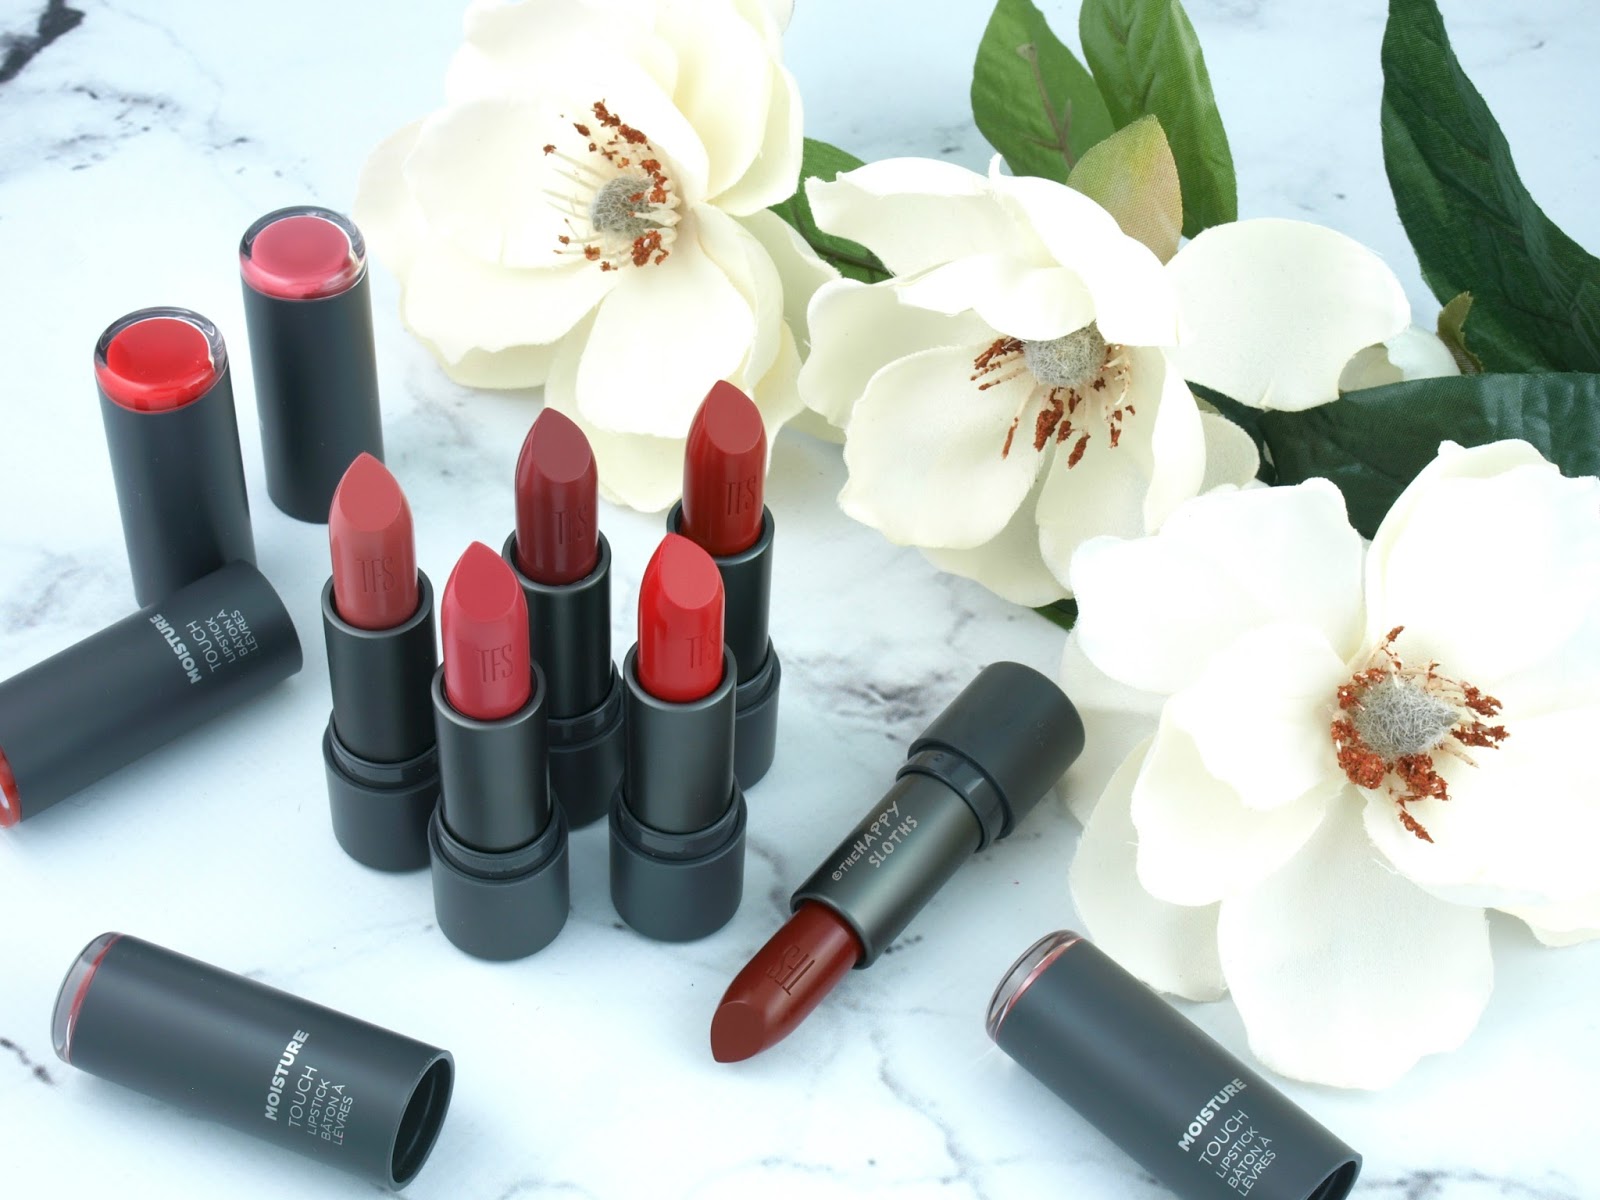 THEFACESHOP Moisture Touch Lipstick: Review and Swatches